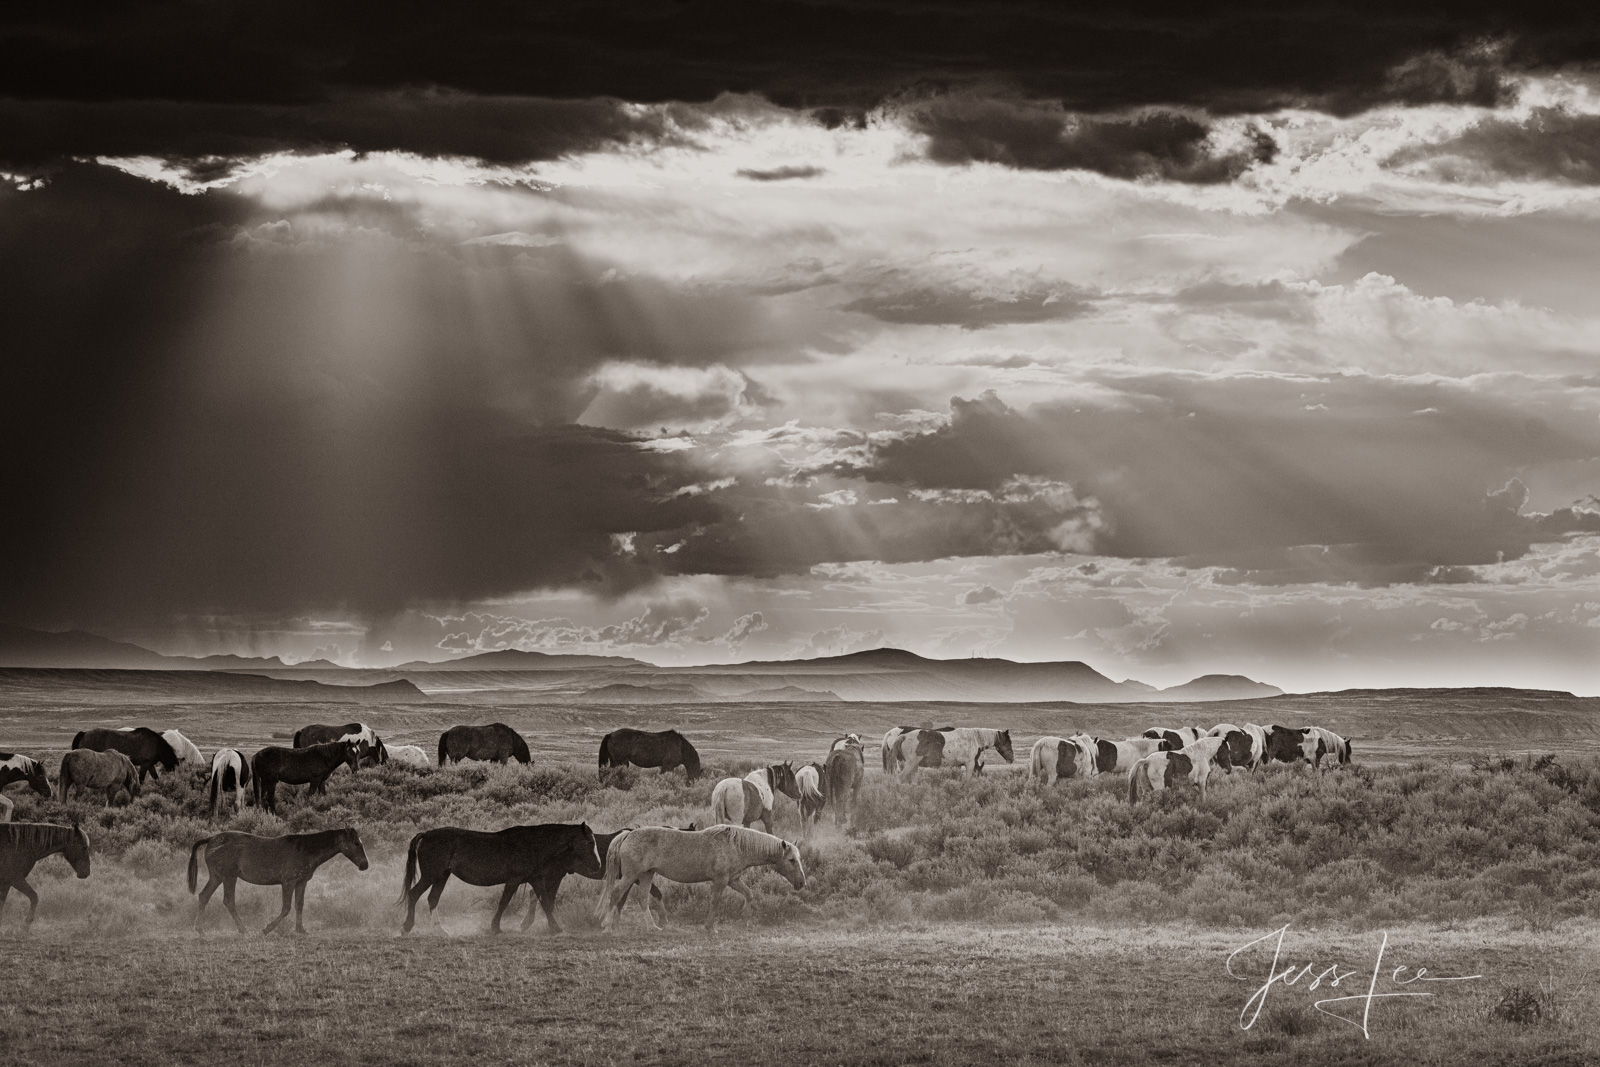 Fine Art Print of beautiful Wyoming Wild Horses with a stormy sky. Limited Edition of 250 Luxurious Prints.  Choose the style...